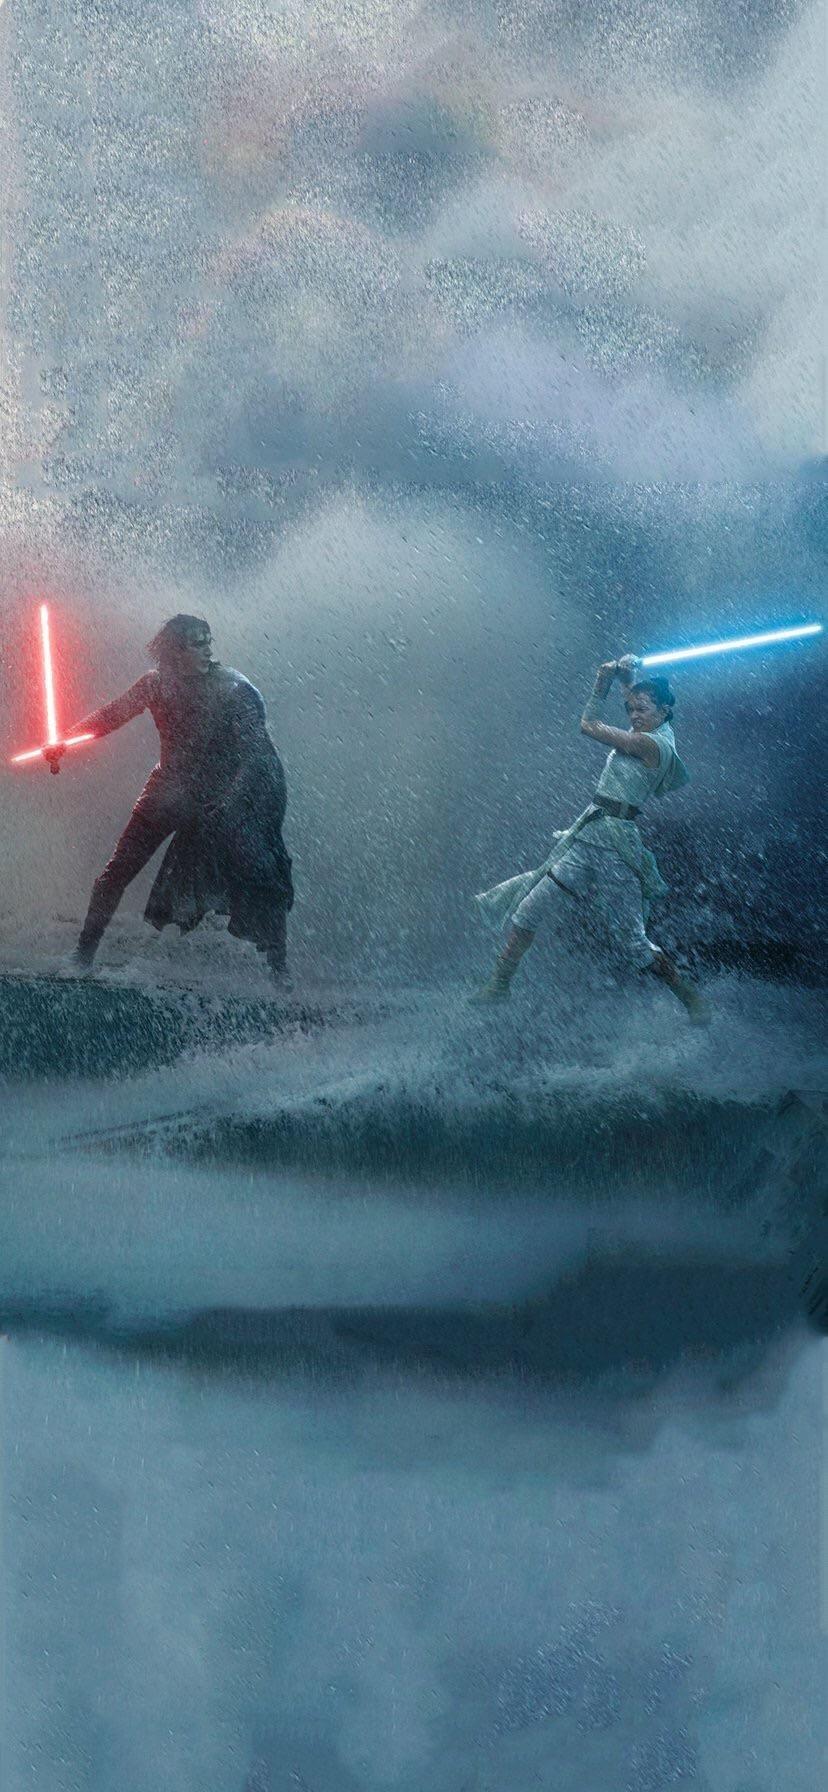 Here is that Rey and Kylo R. Star wars wallpaper iphone